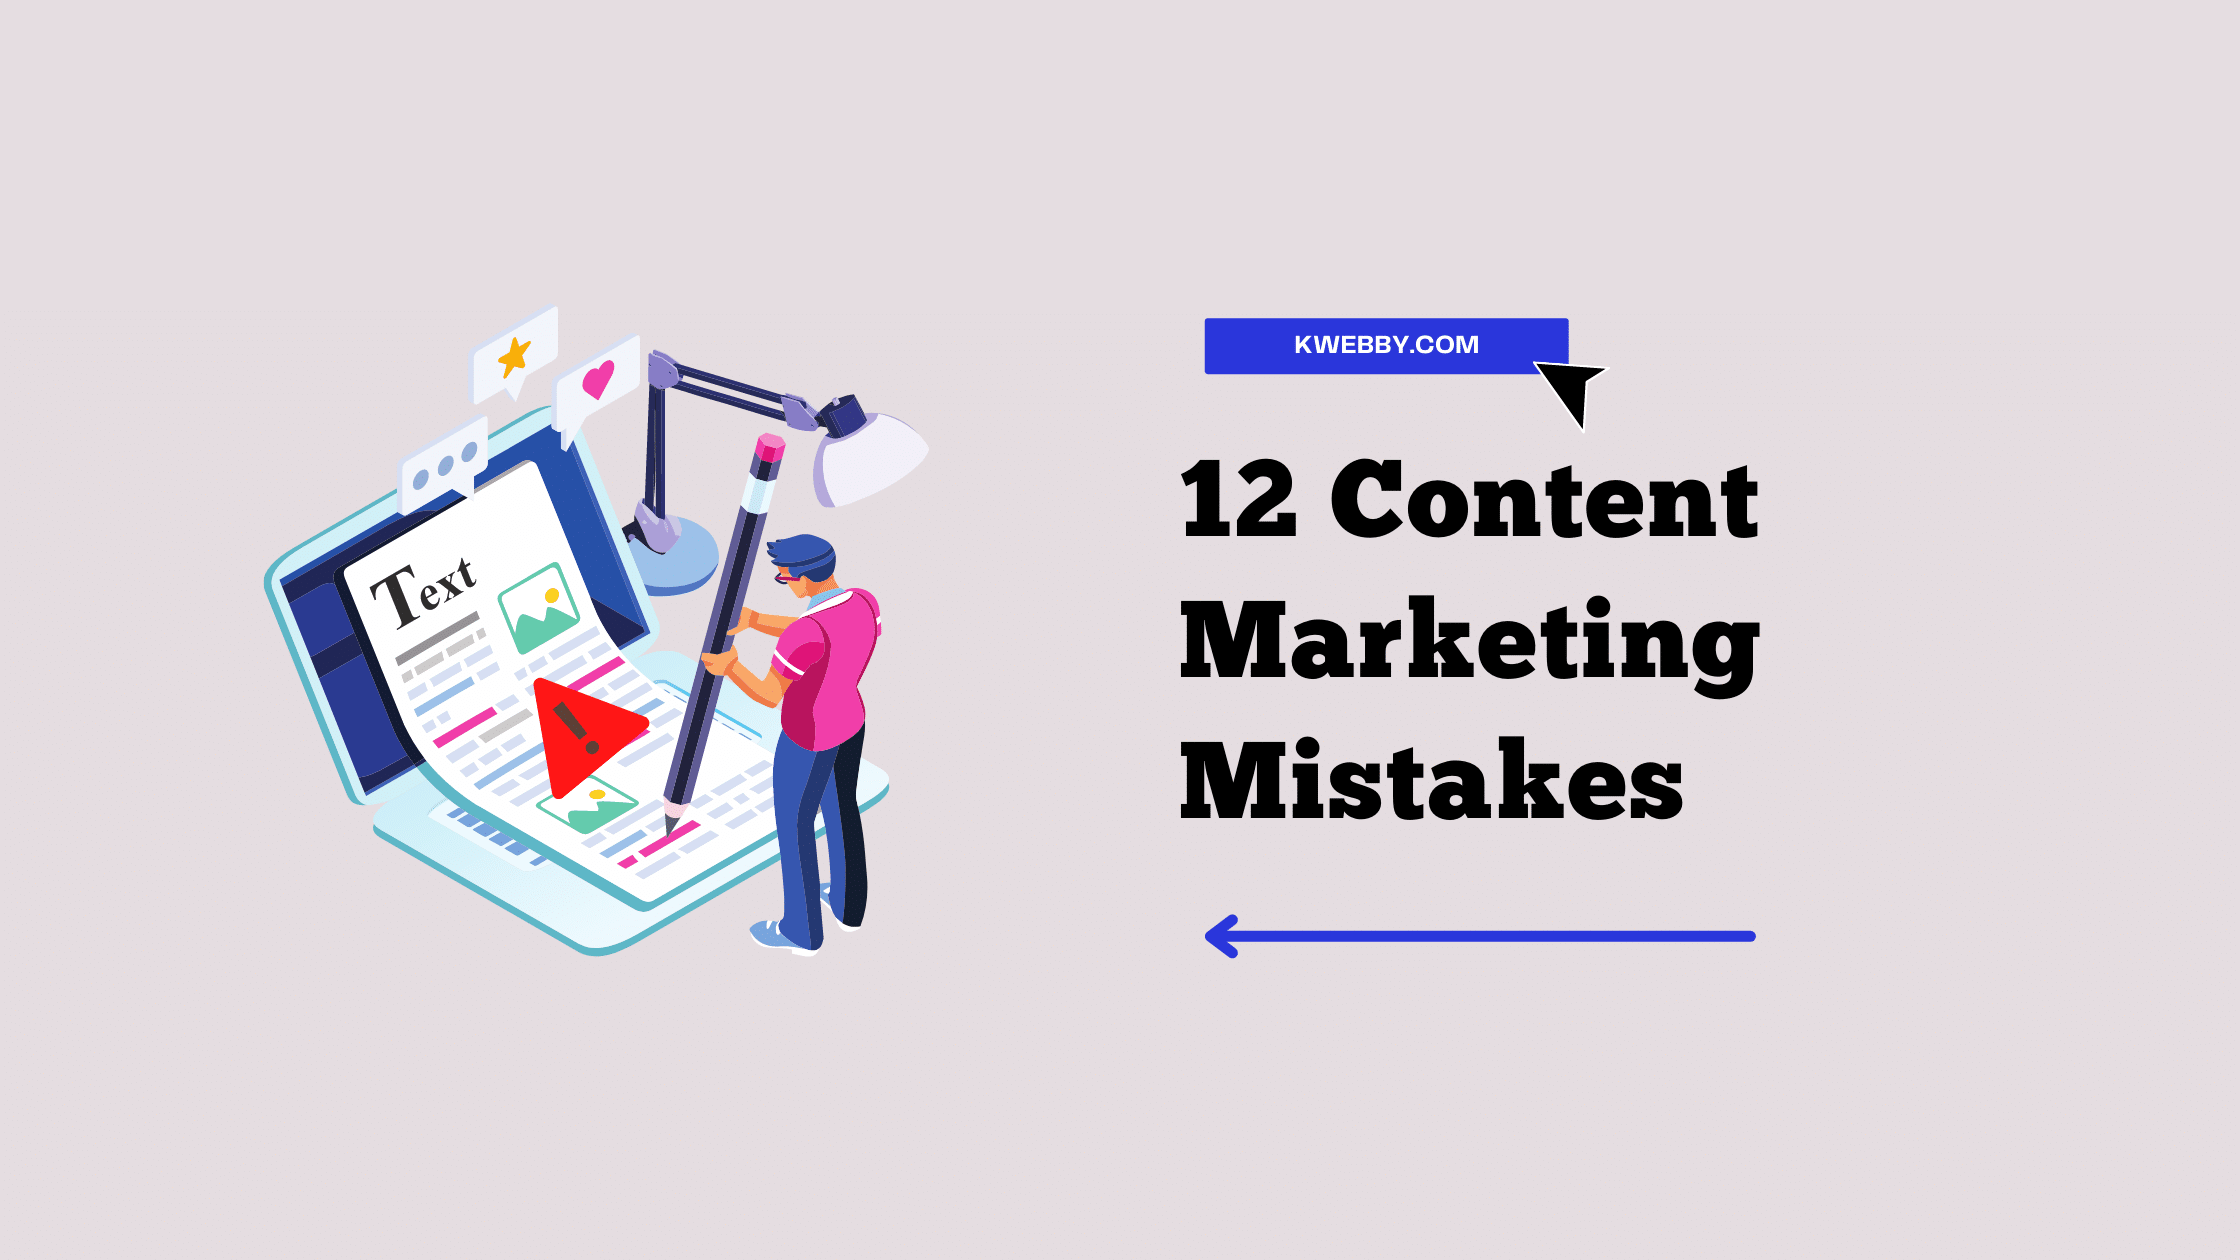 These 12 Content Marketing Mistakes Reduce Engagement and Profits